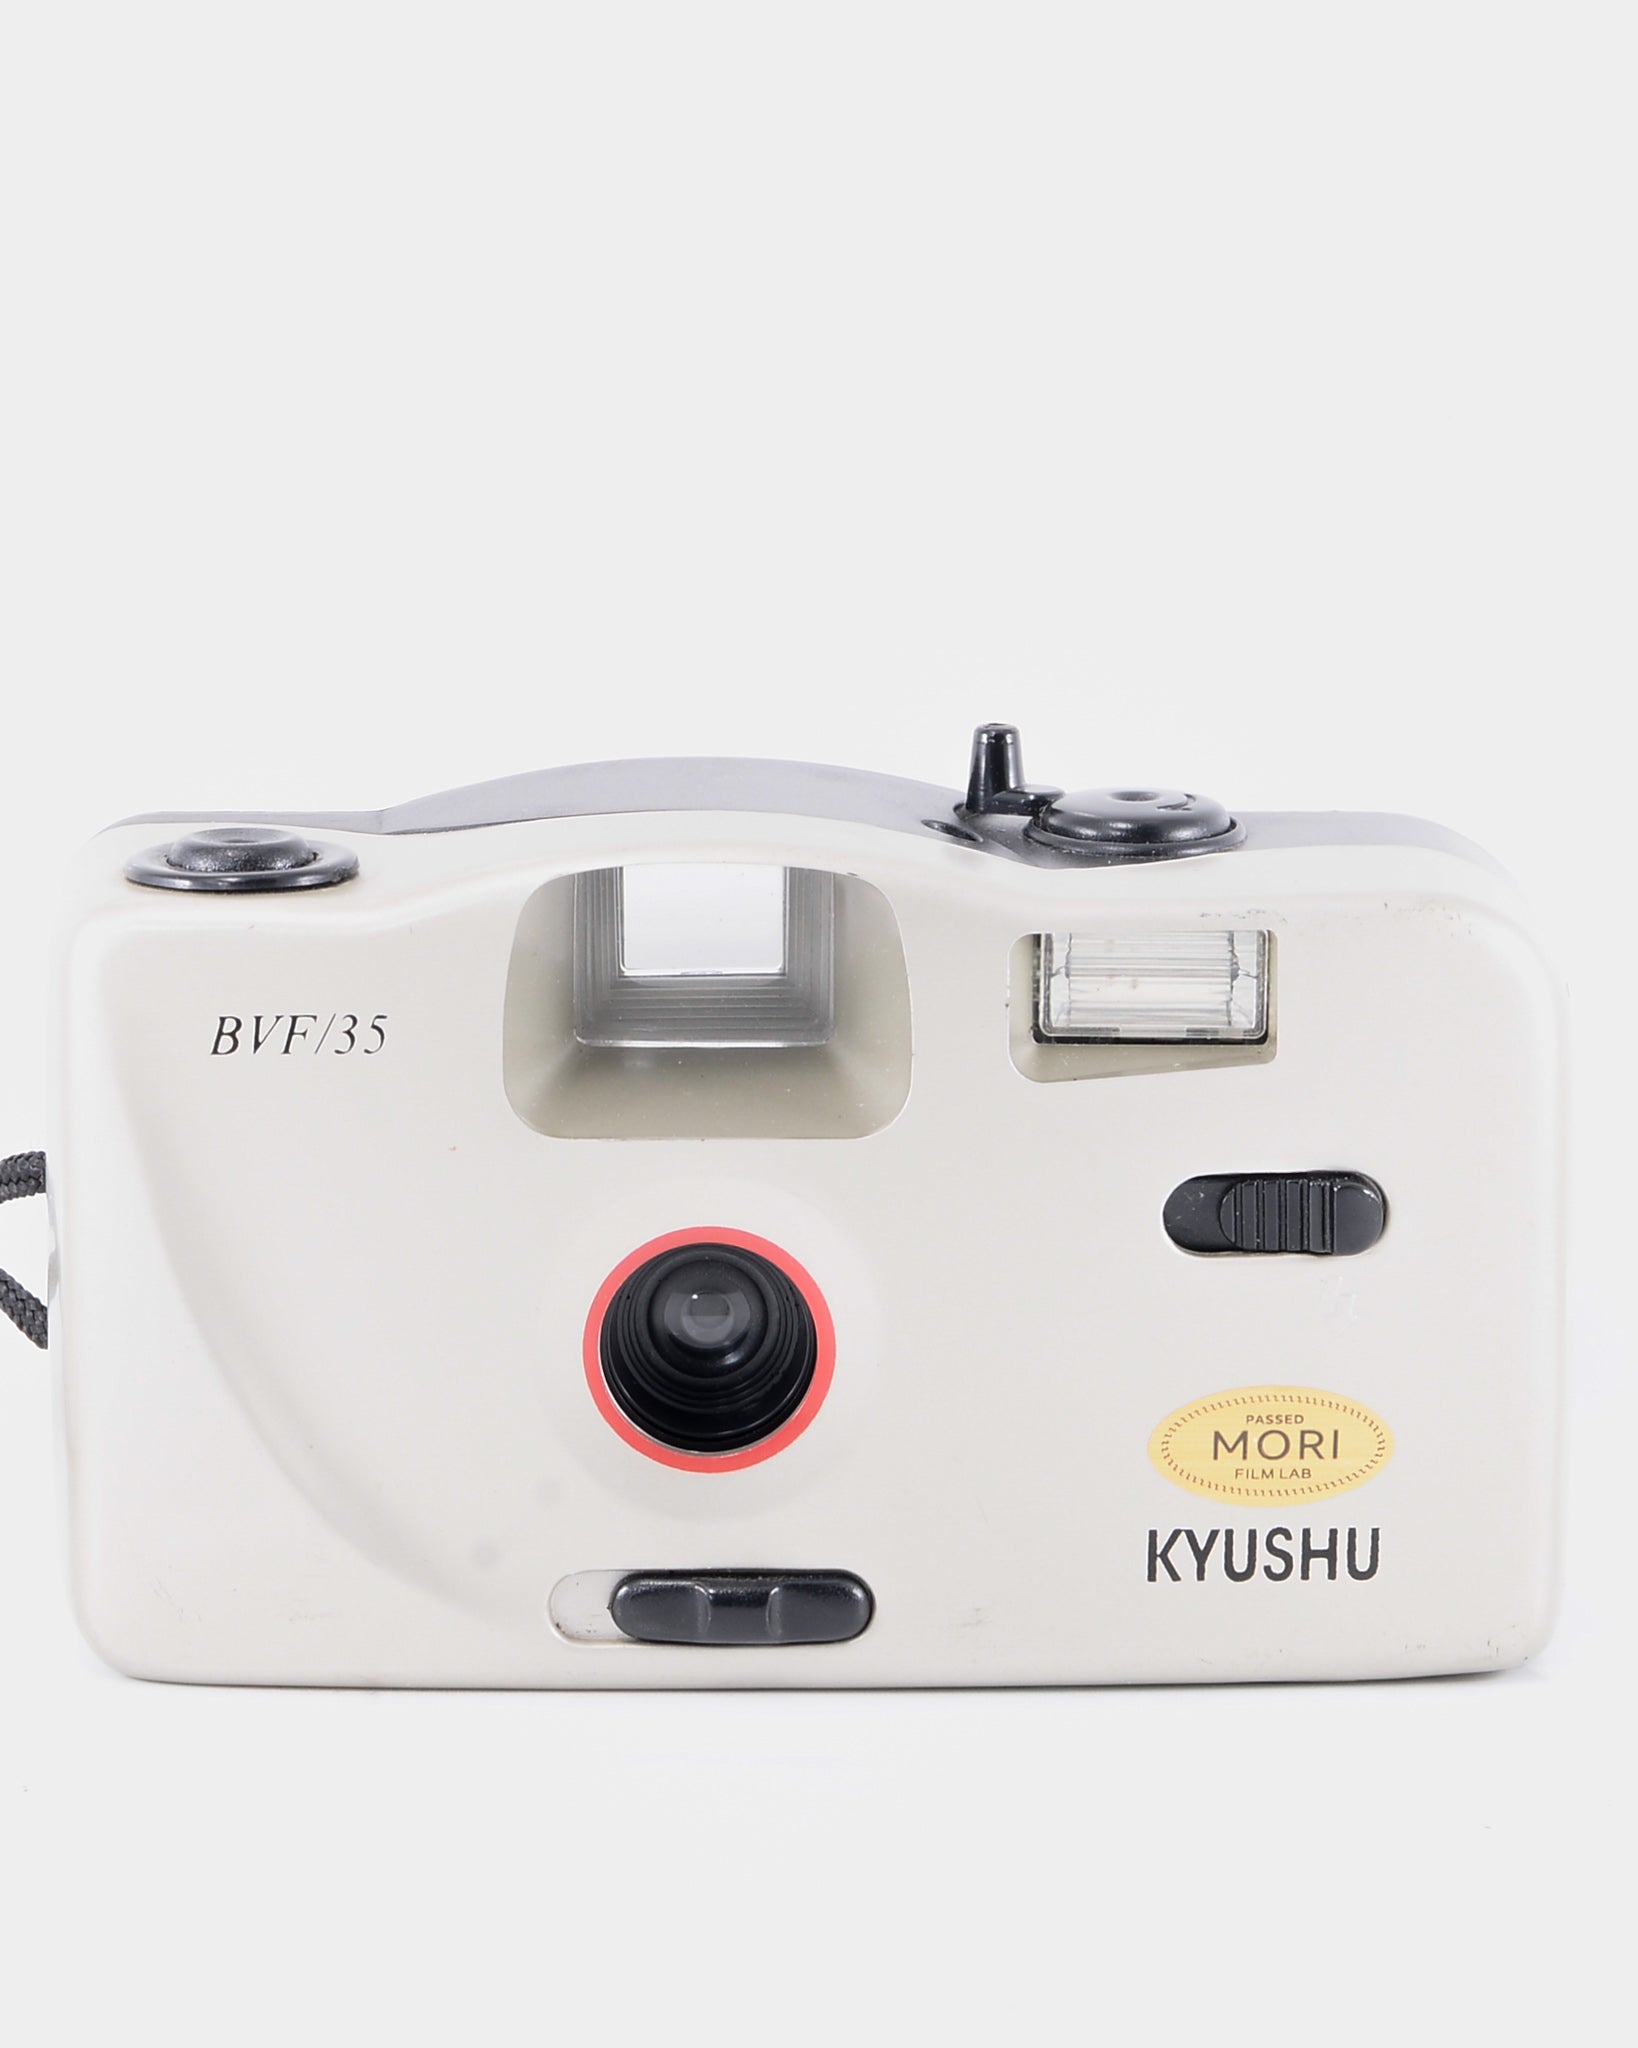 Kyushu BVF/35 35mm Point & Shoot film camera with 35mm lens